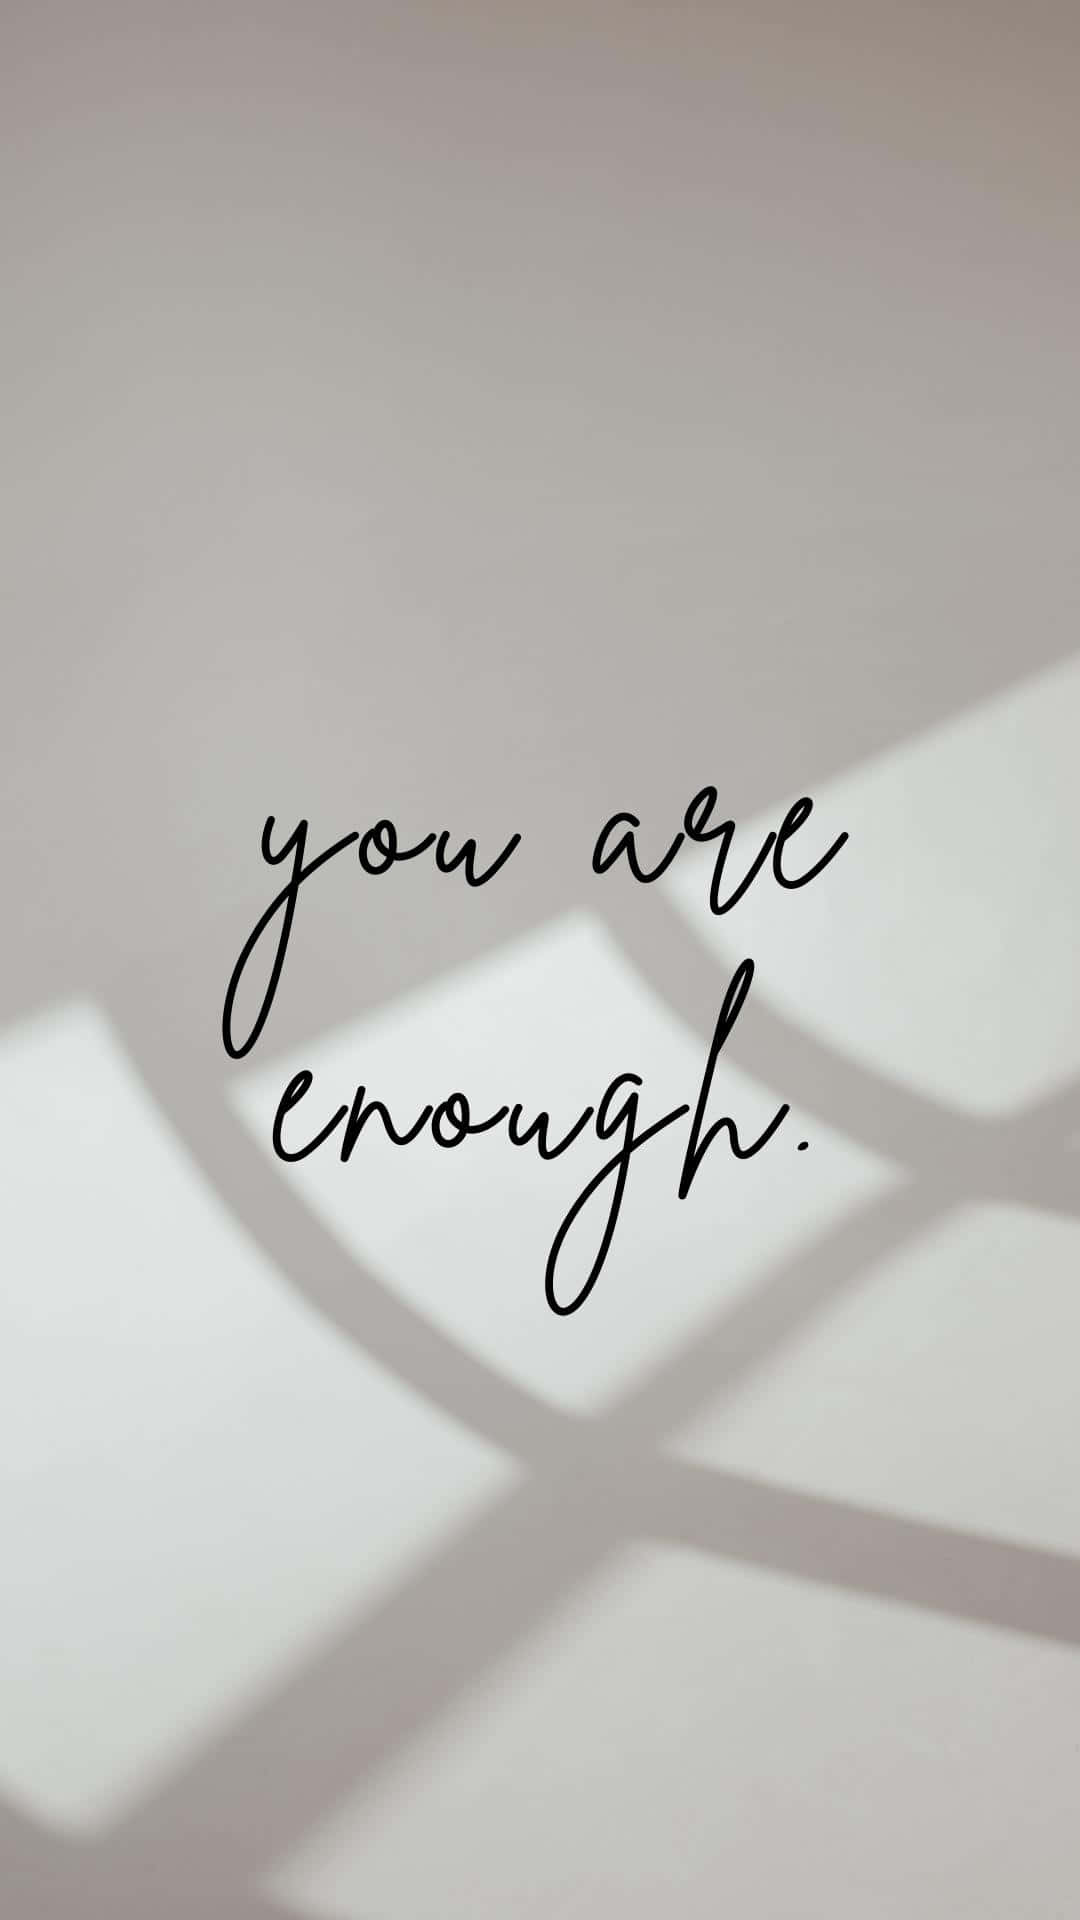 You Are Enough Quote Wallpaper